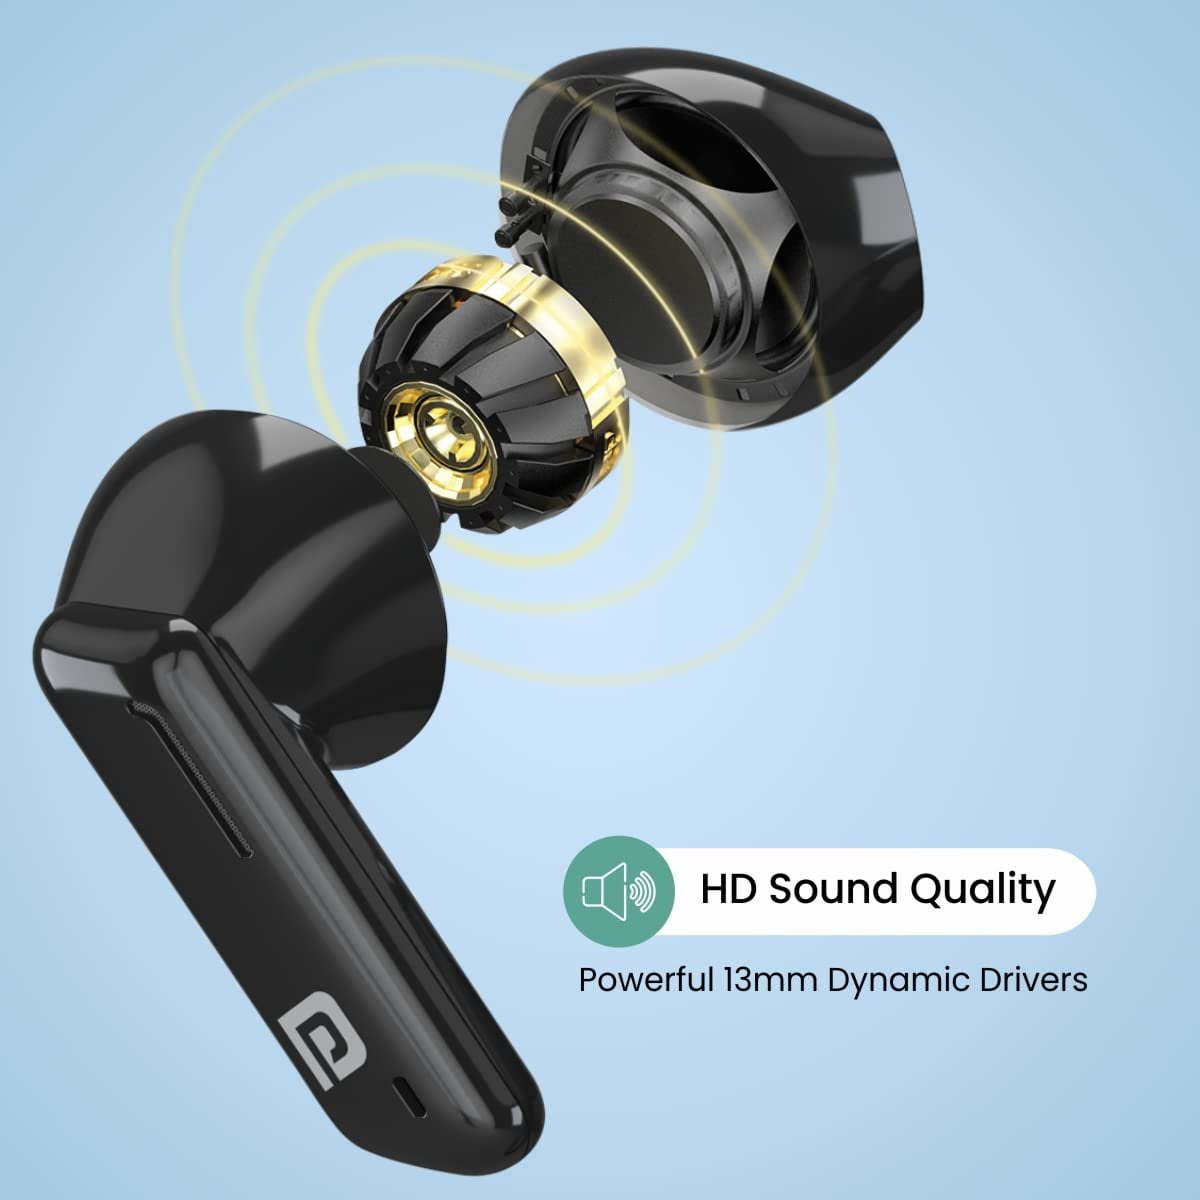 Harmonics Twins 11 Earbuds 4 Shop Mobile Accessories Online in India